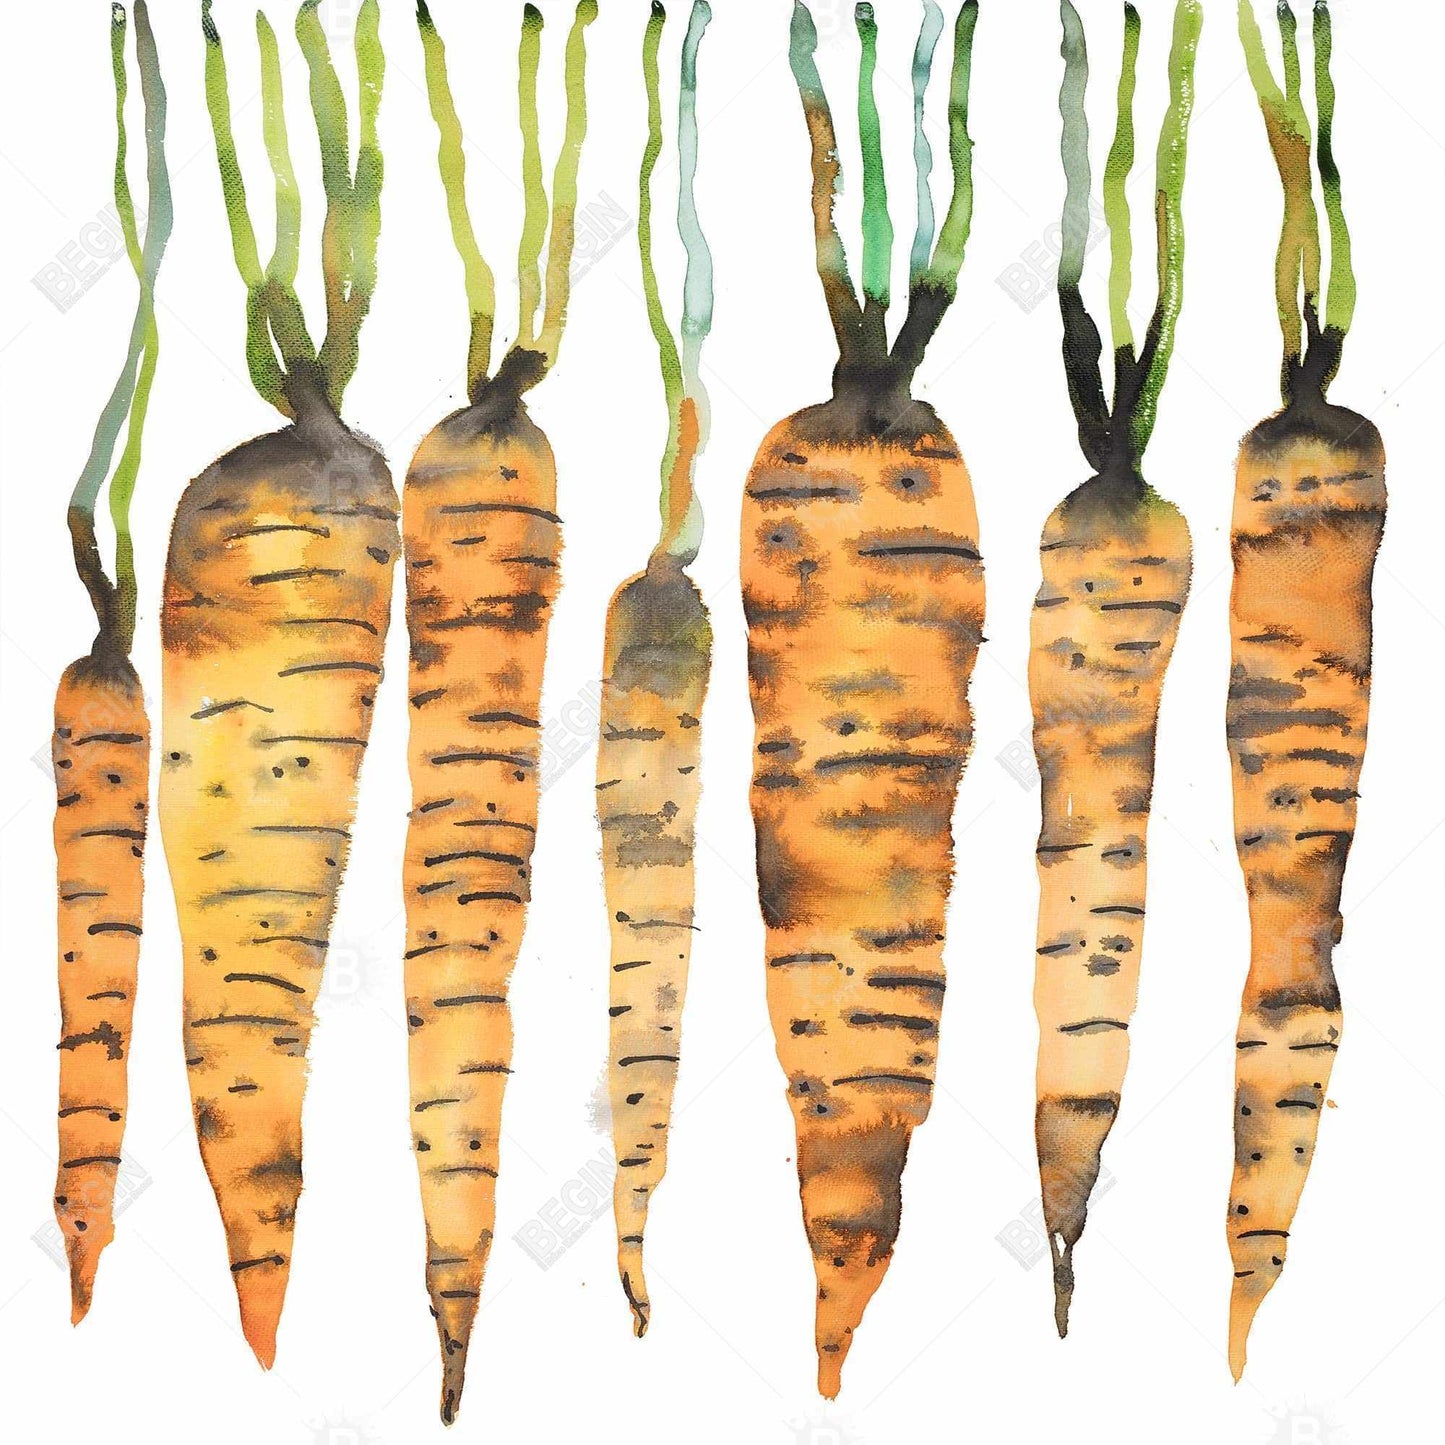 Watercolor carrots - 32x32 Print on canvas